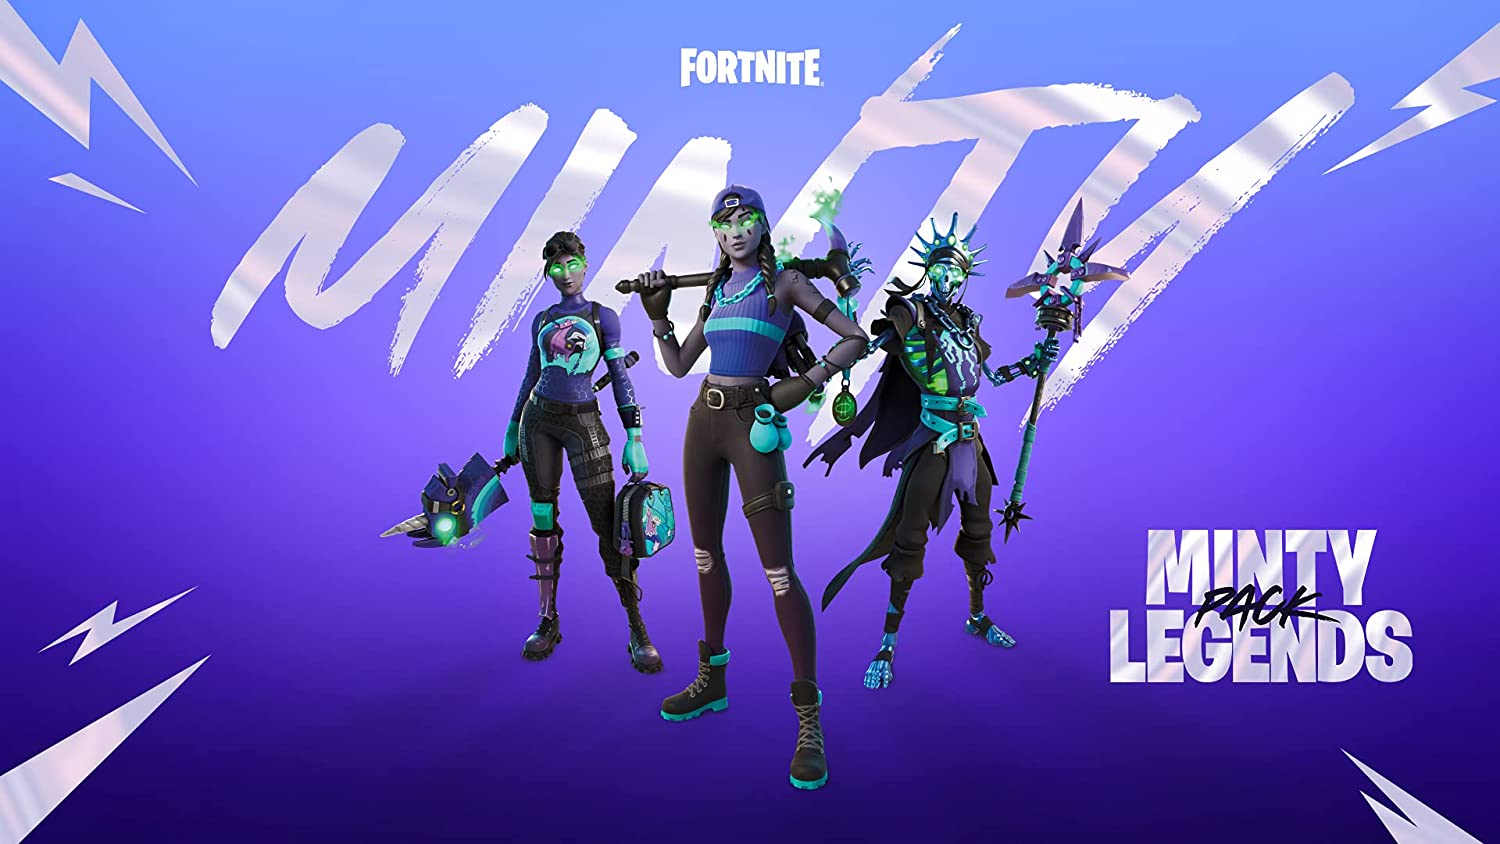 PS4 Fortnite Minty Legends Pack - Nintendo Switch